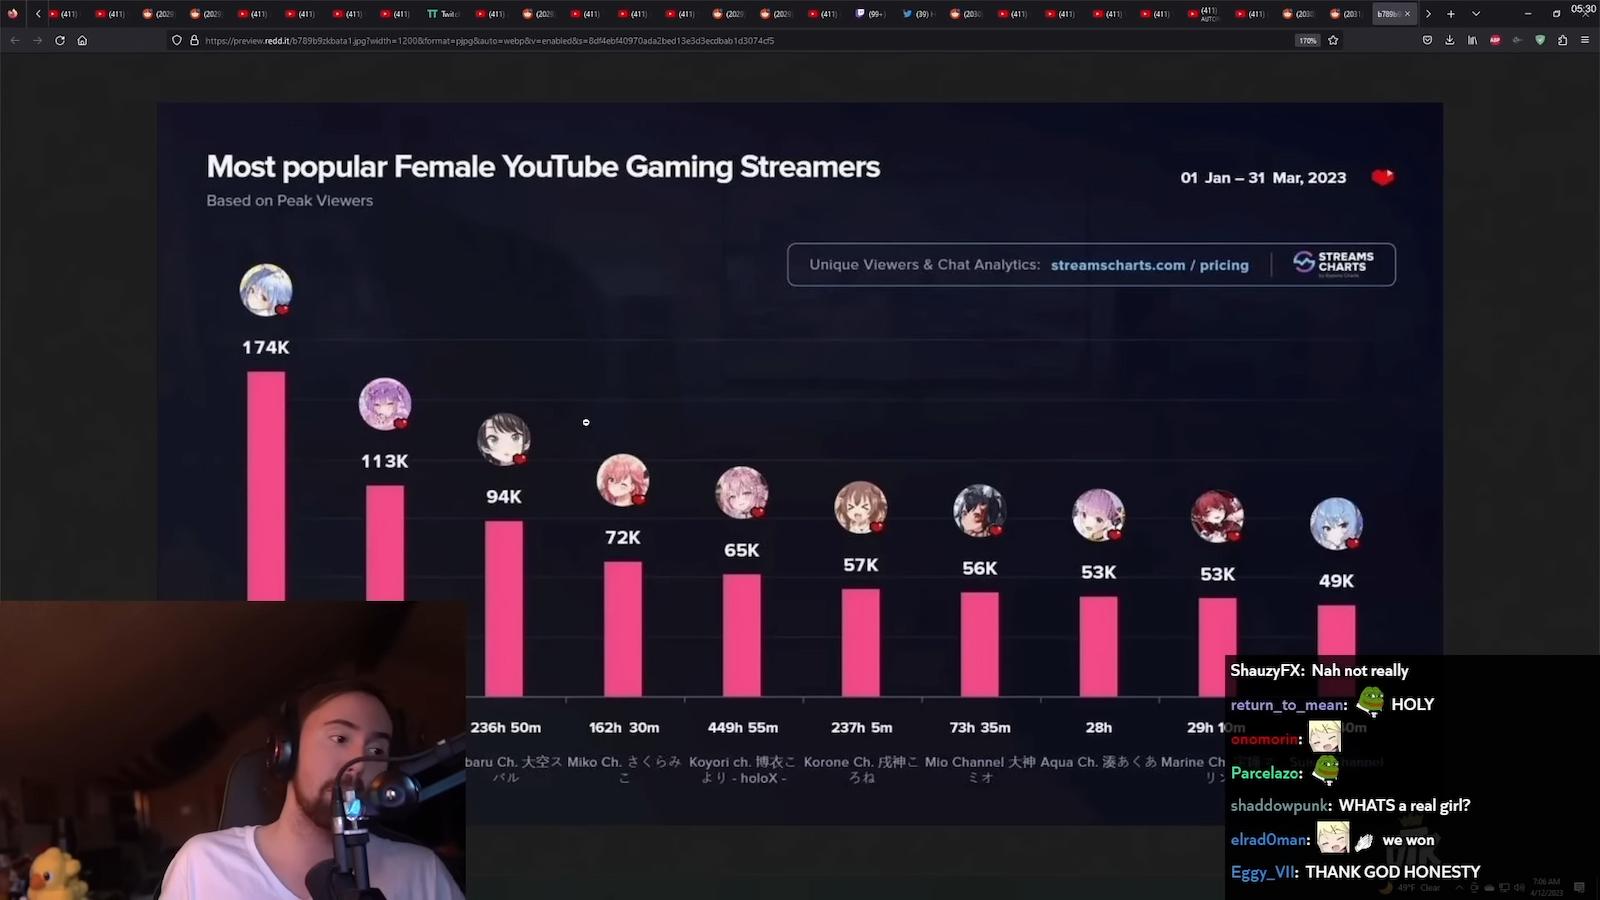 Asmongold looking at most popular female YouTube streamers